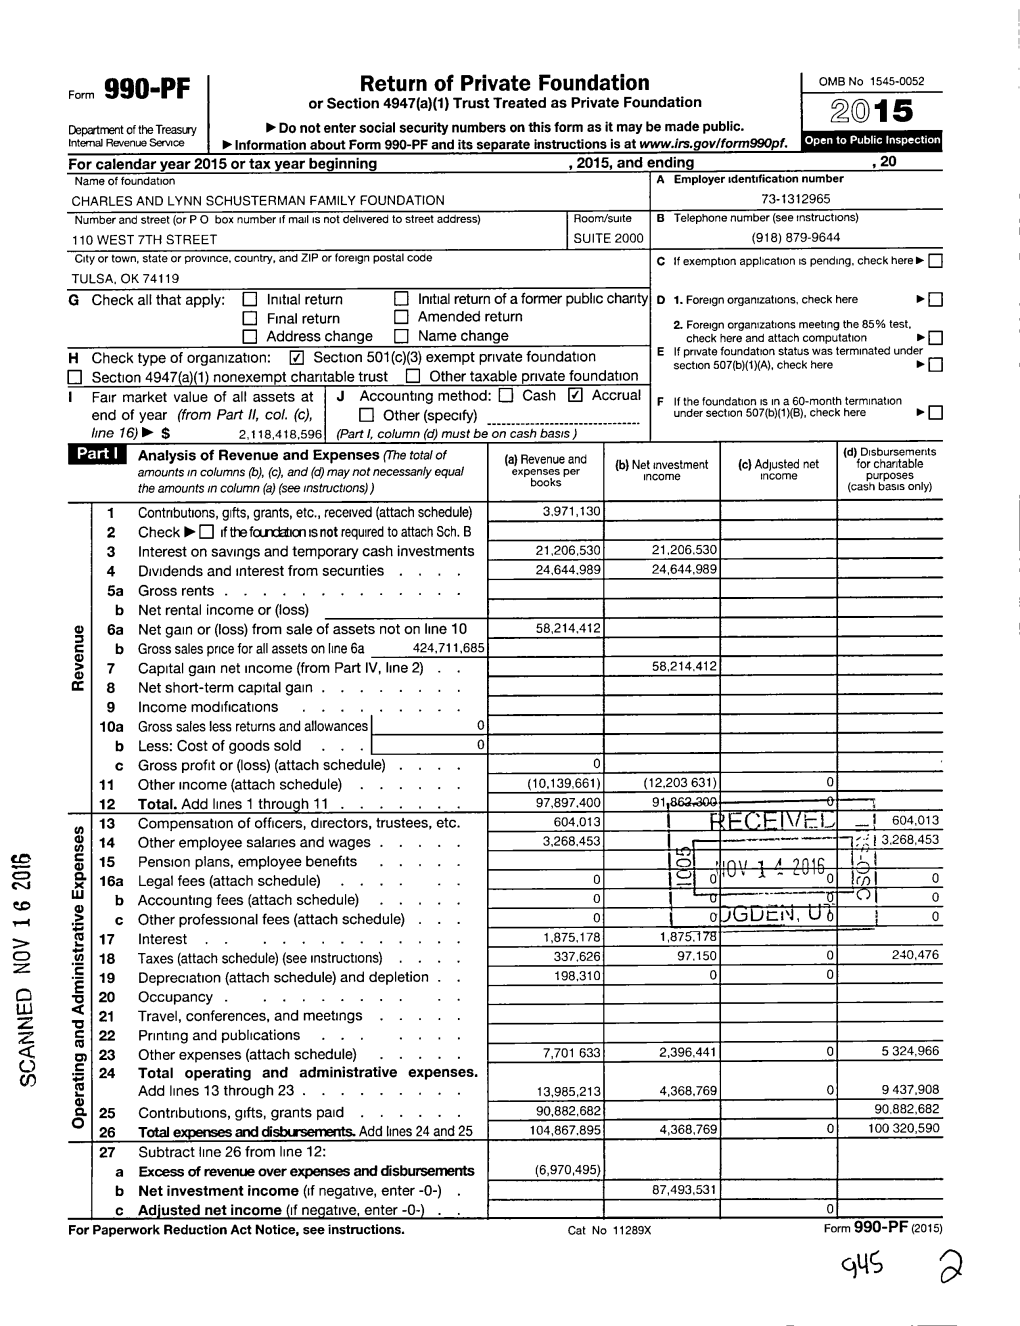 Return of Private Foundation OMB No 1545-0052 Form 990-PF Or Section 4947(A)(1) Trust Treated As Private Foundation 20015 on This Form As It May Be Made Public